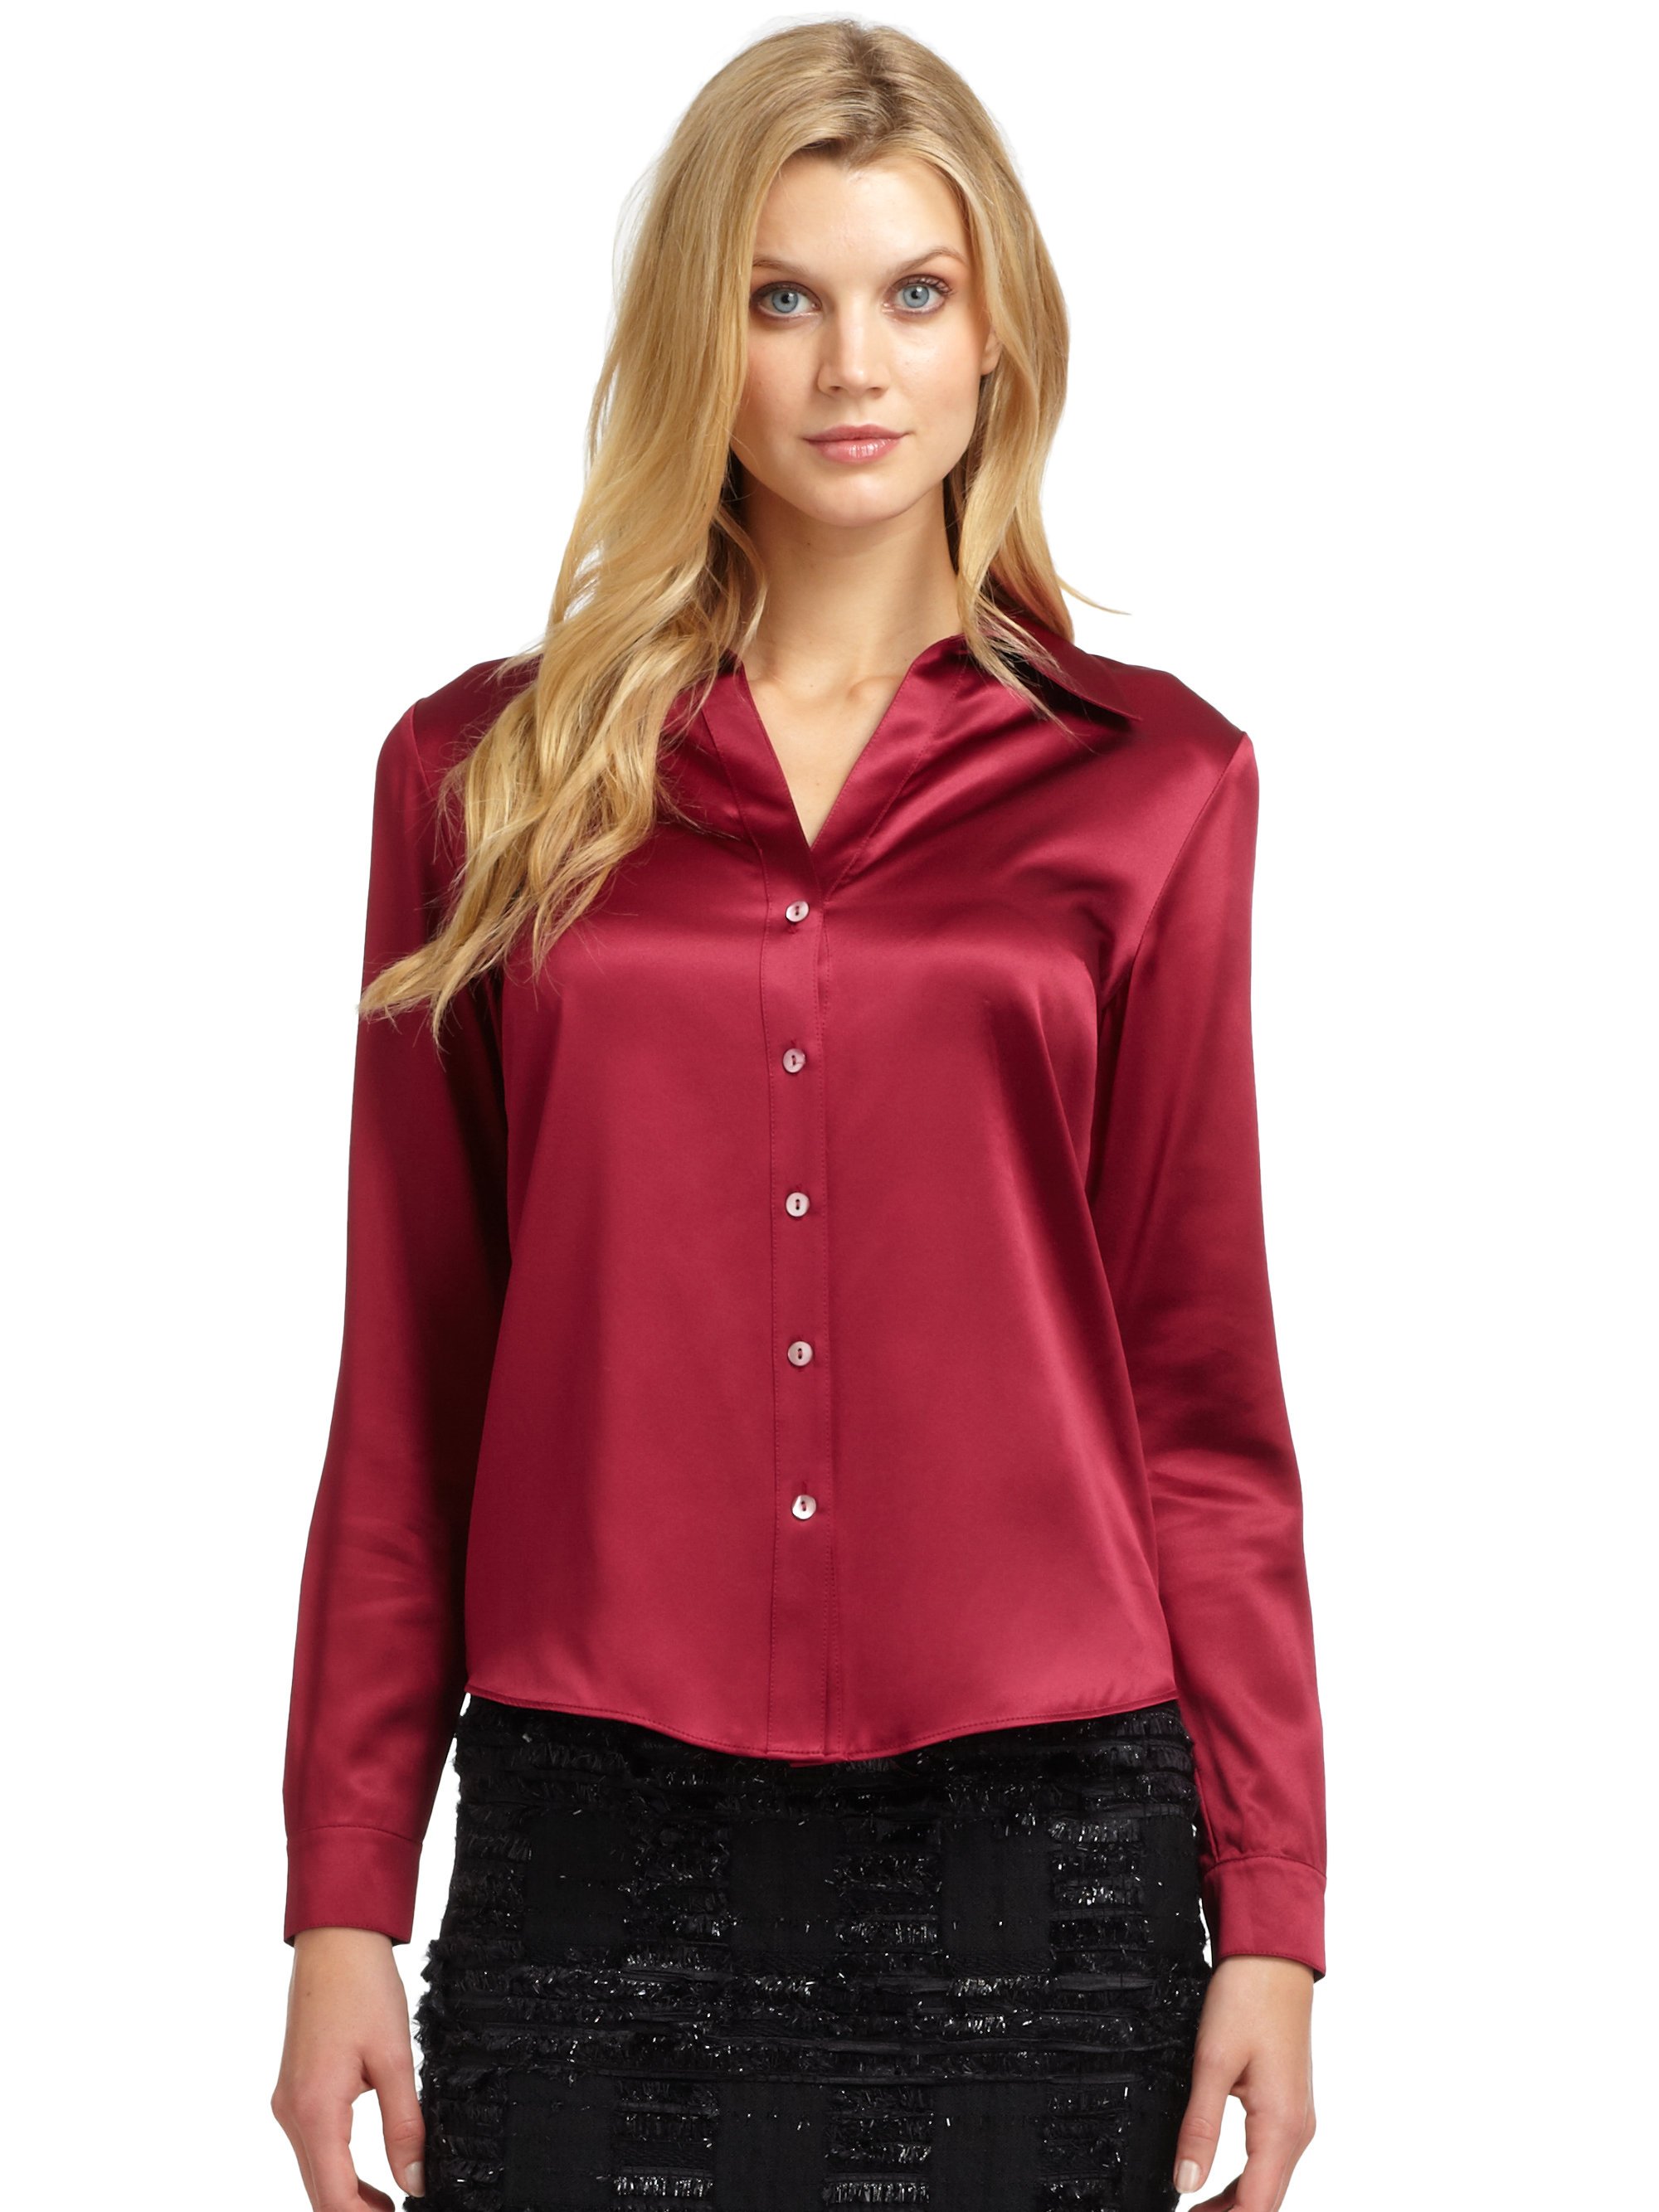 Lyst - Lafayette 148 New York Silk Satin Blouse in Red